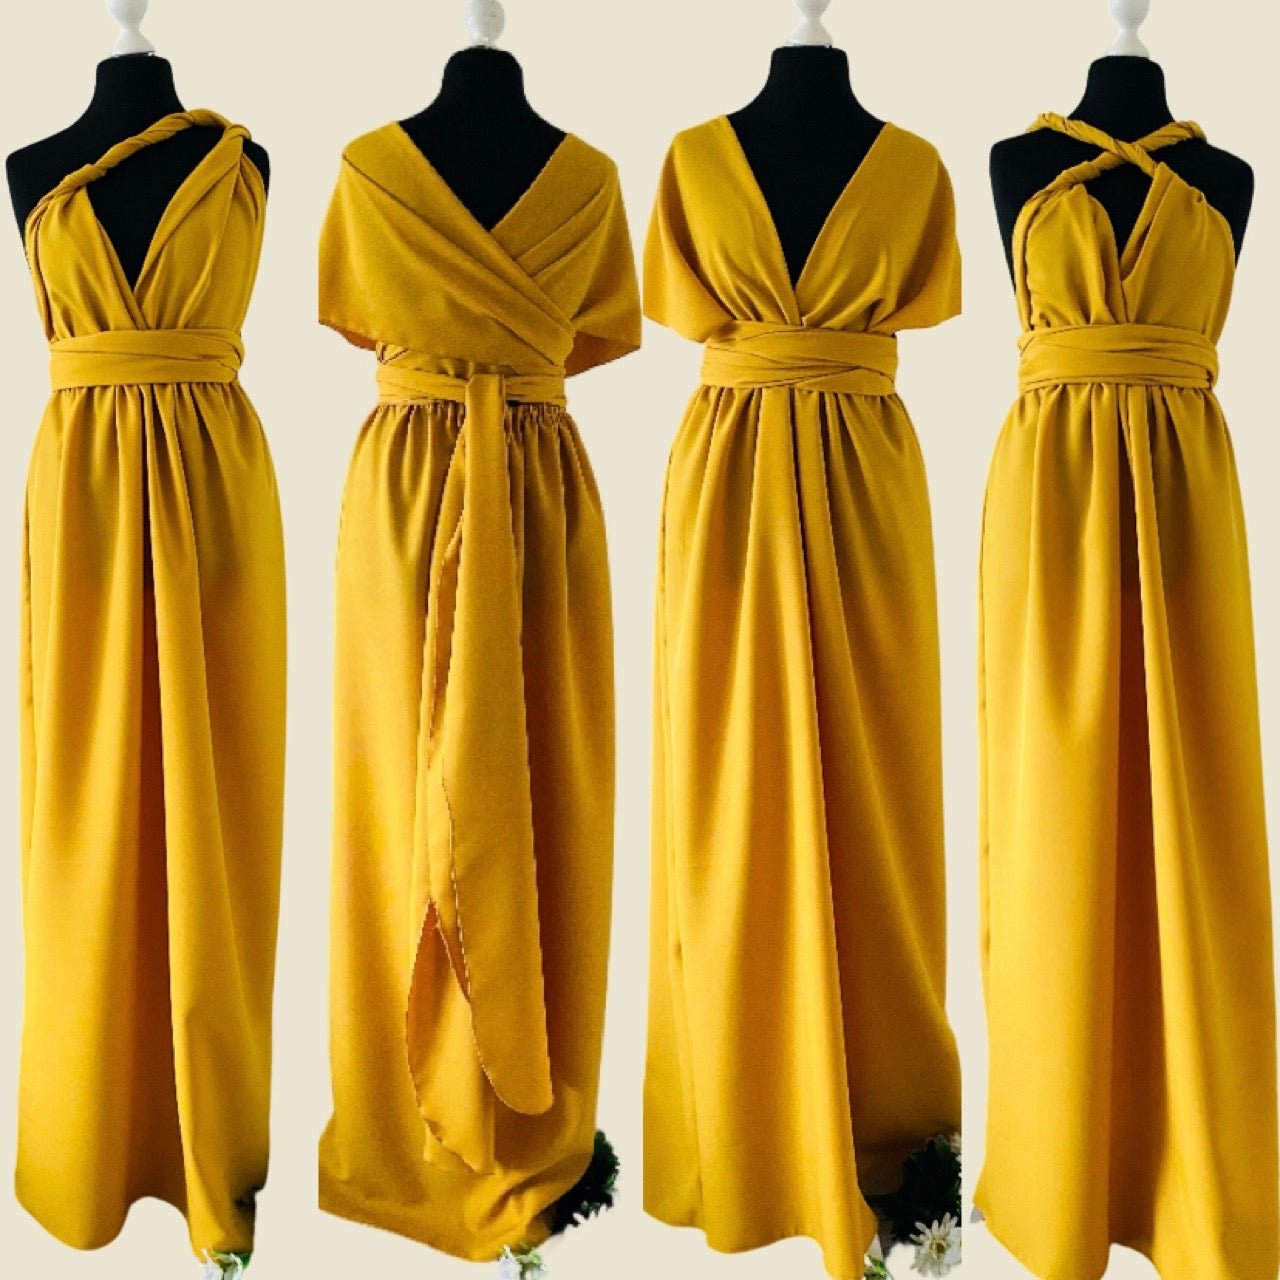 Robe infinity jaune Moutarde - Robe demoiselle d’honneur Convertible - Kaysol Couture